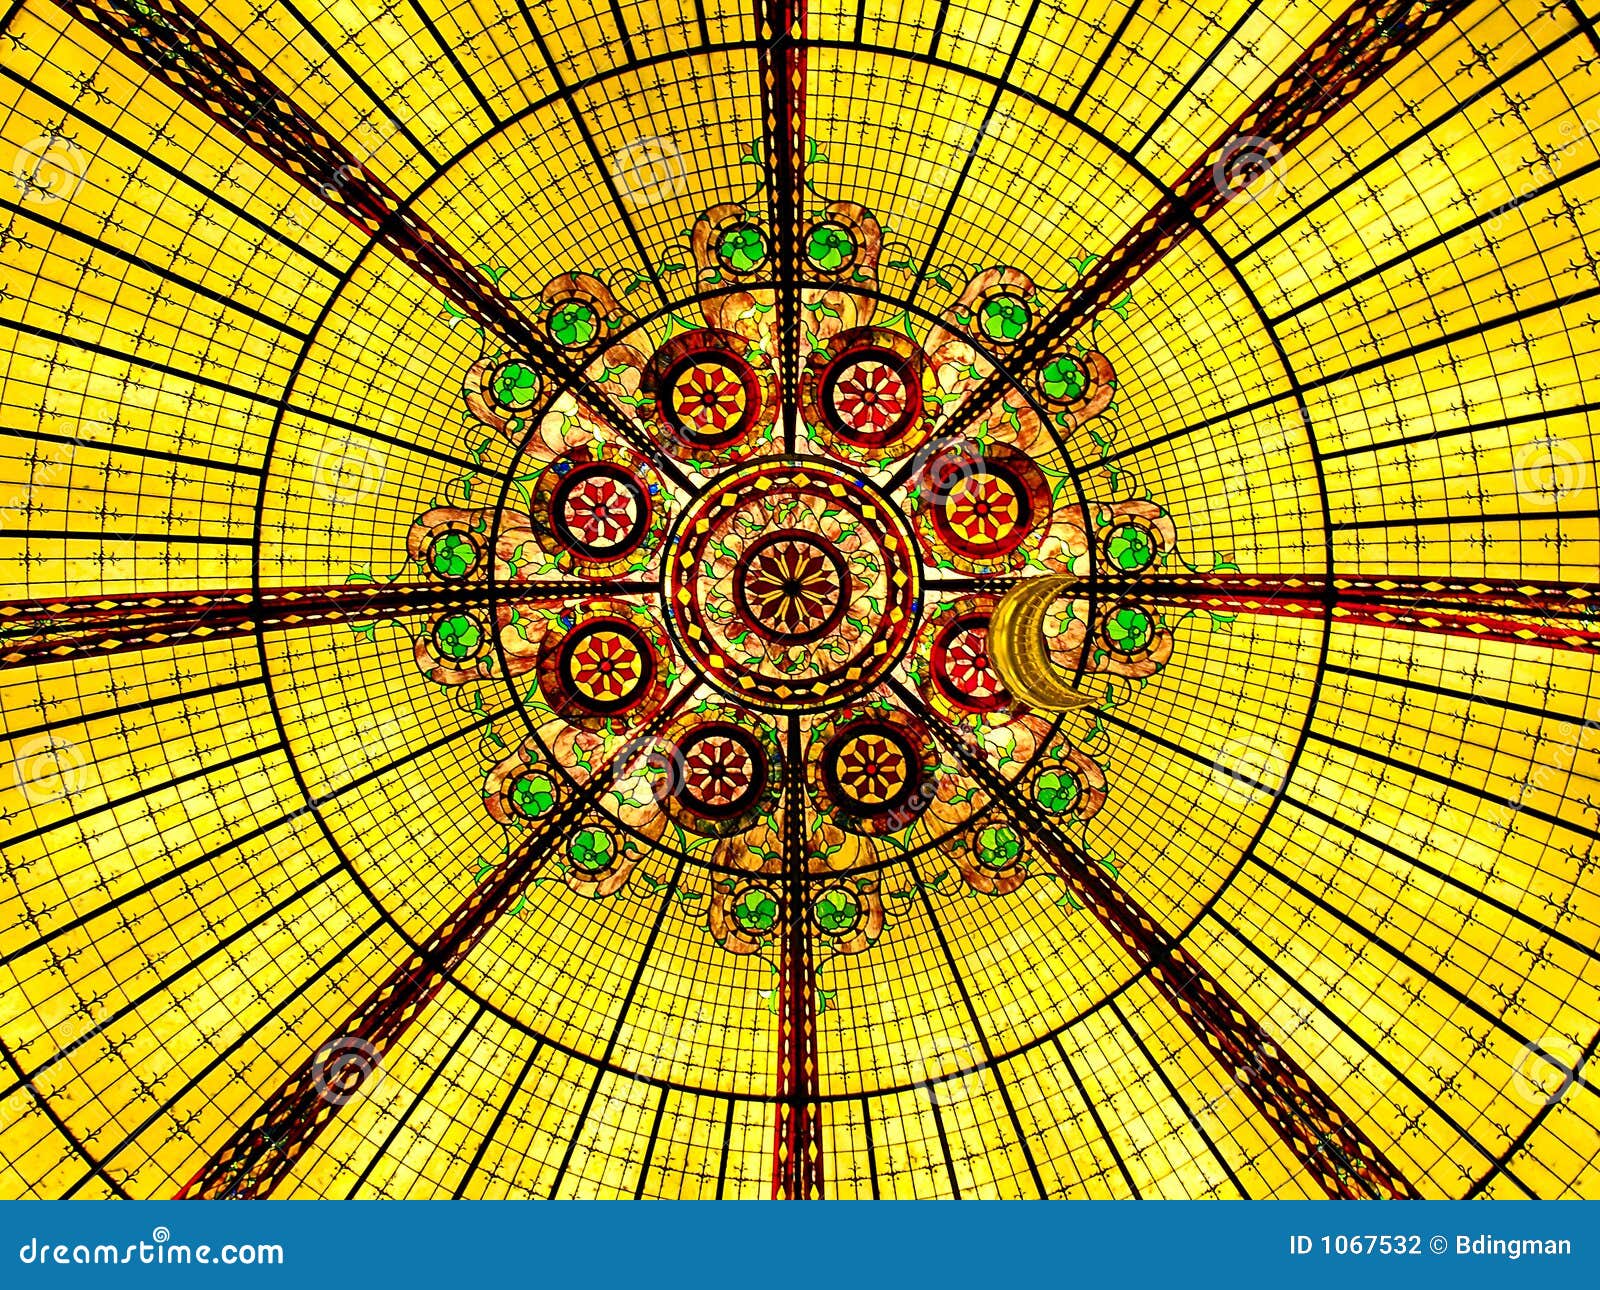 Glass Ceiling Stock Photo Image Of Patterned Ceiling 1067532